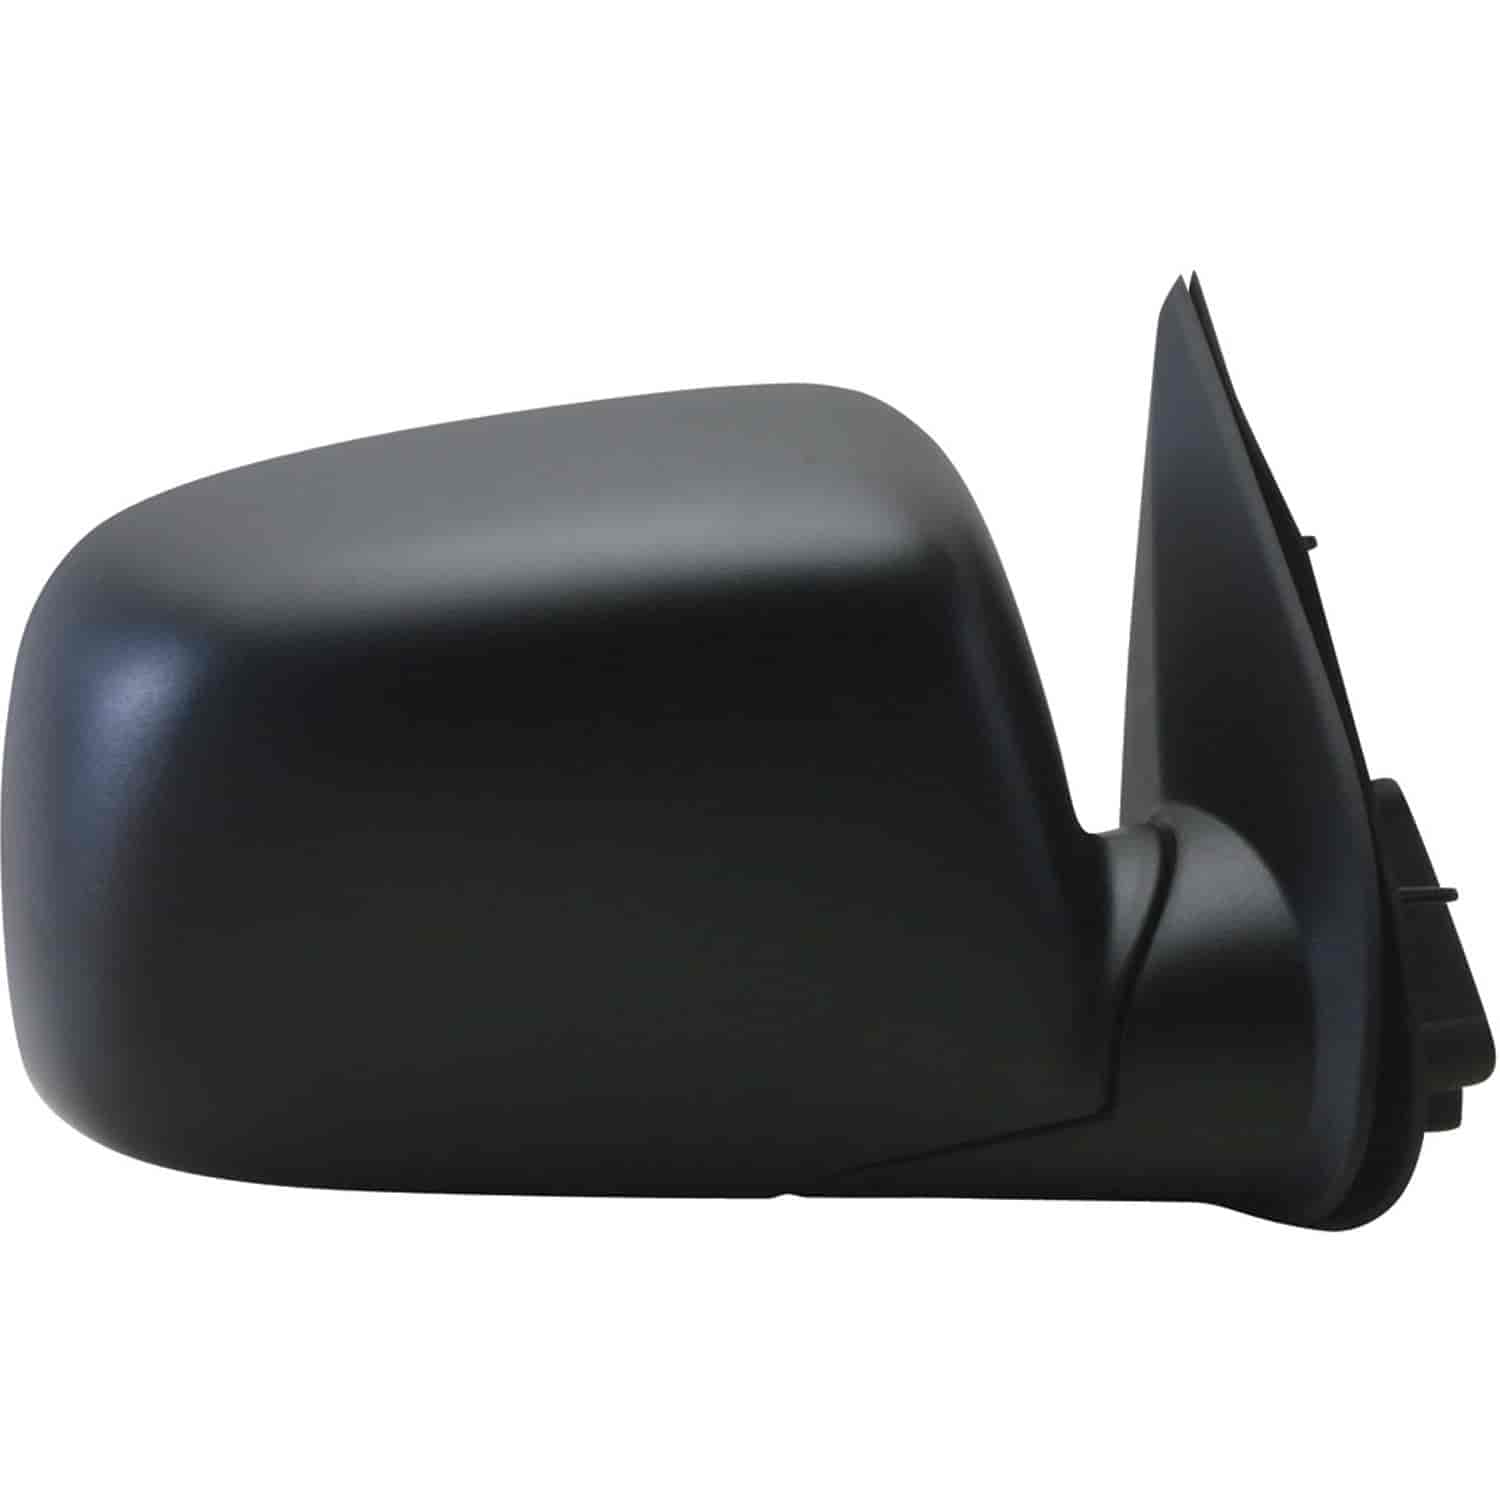 OEM Style Replacement mirror for 04-12 Chevy Colorado P-U GMC Canyon P-U passenger side mirror teste